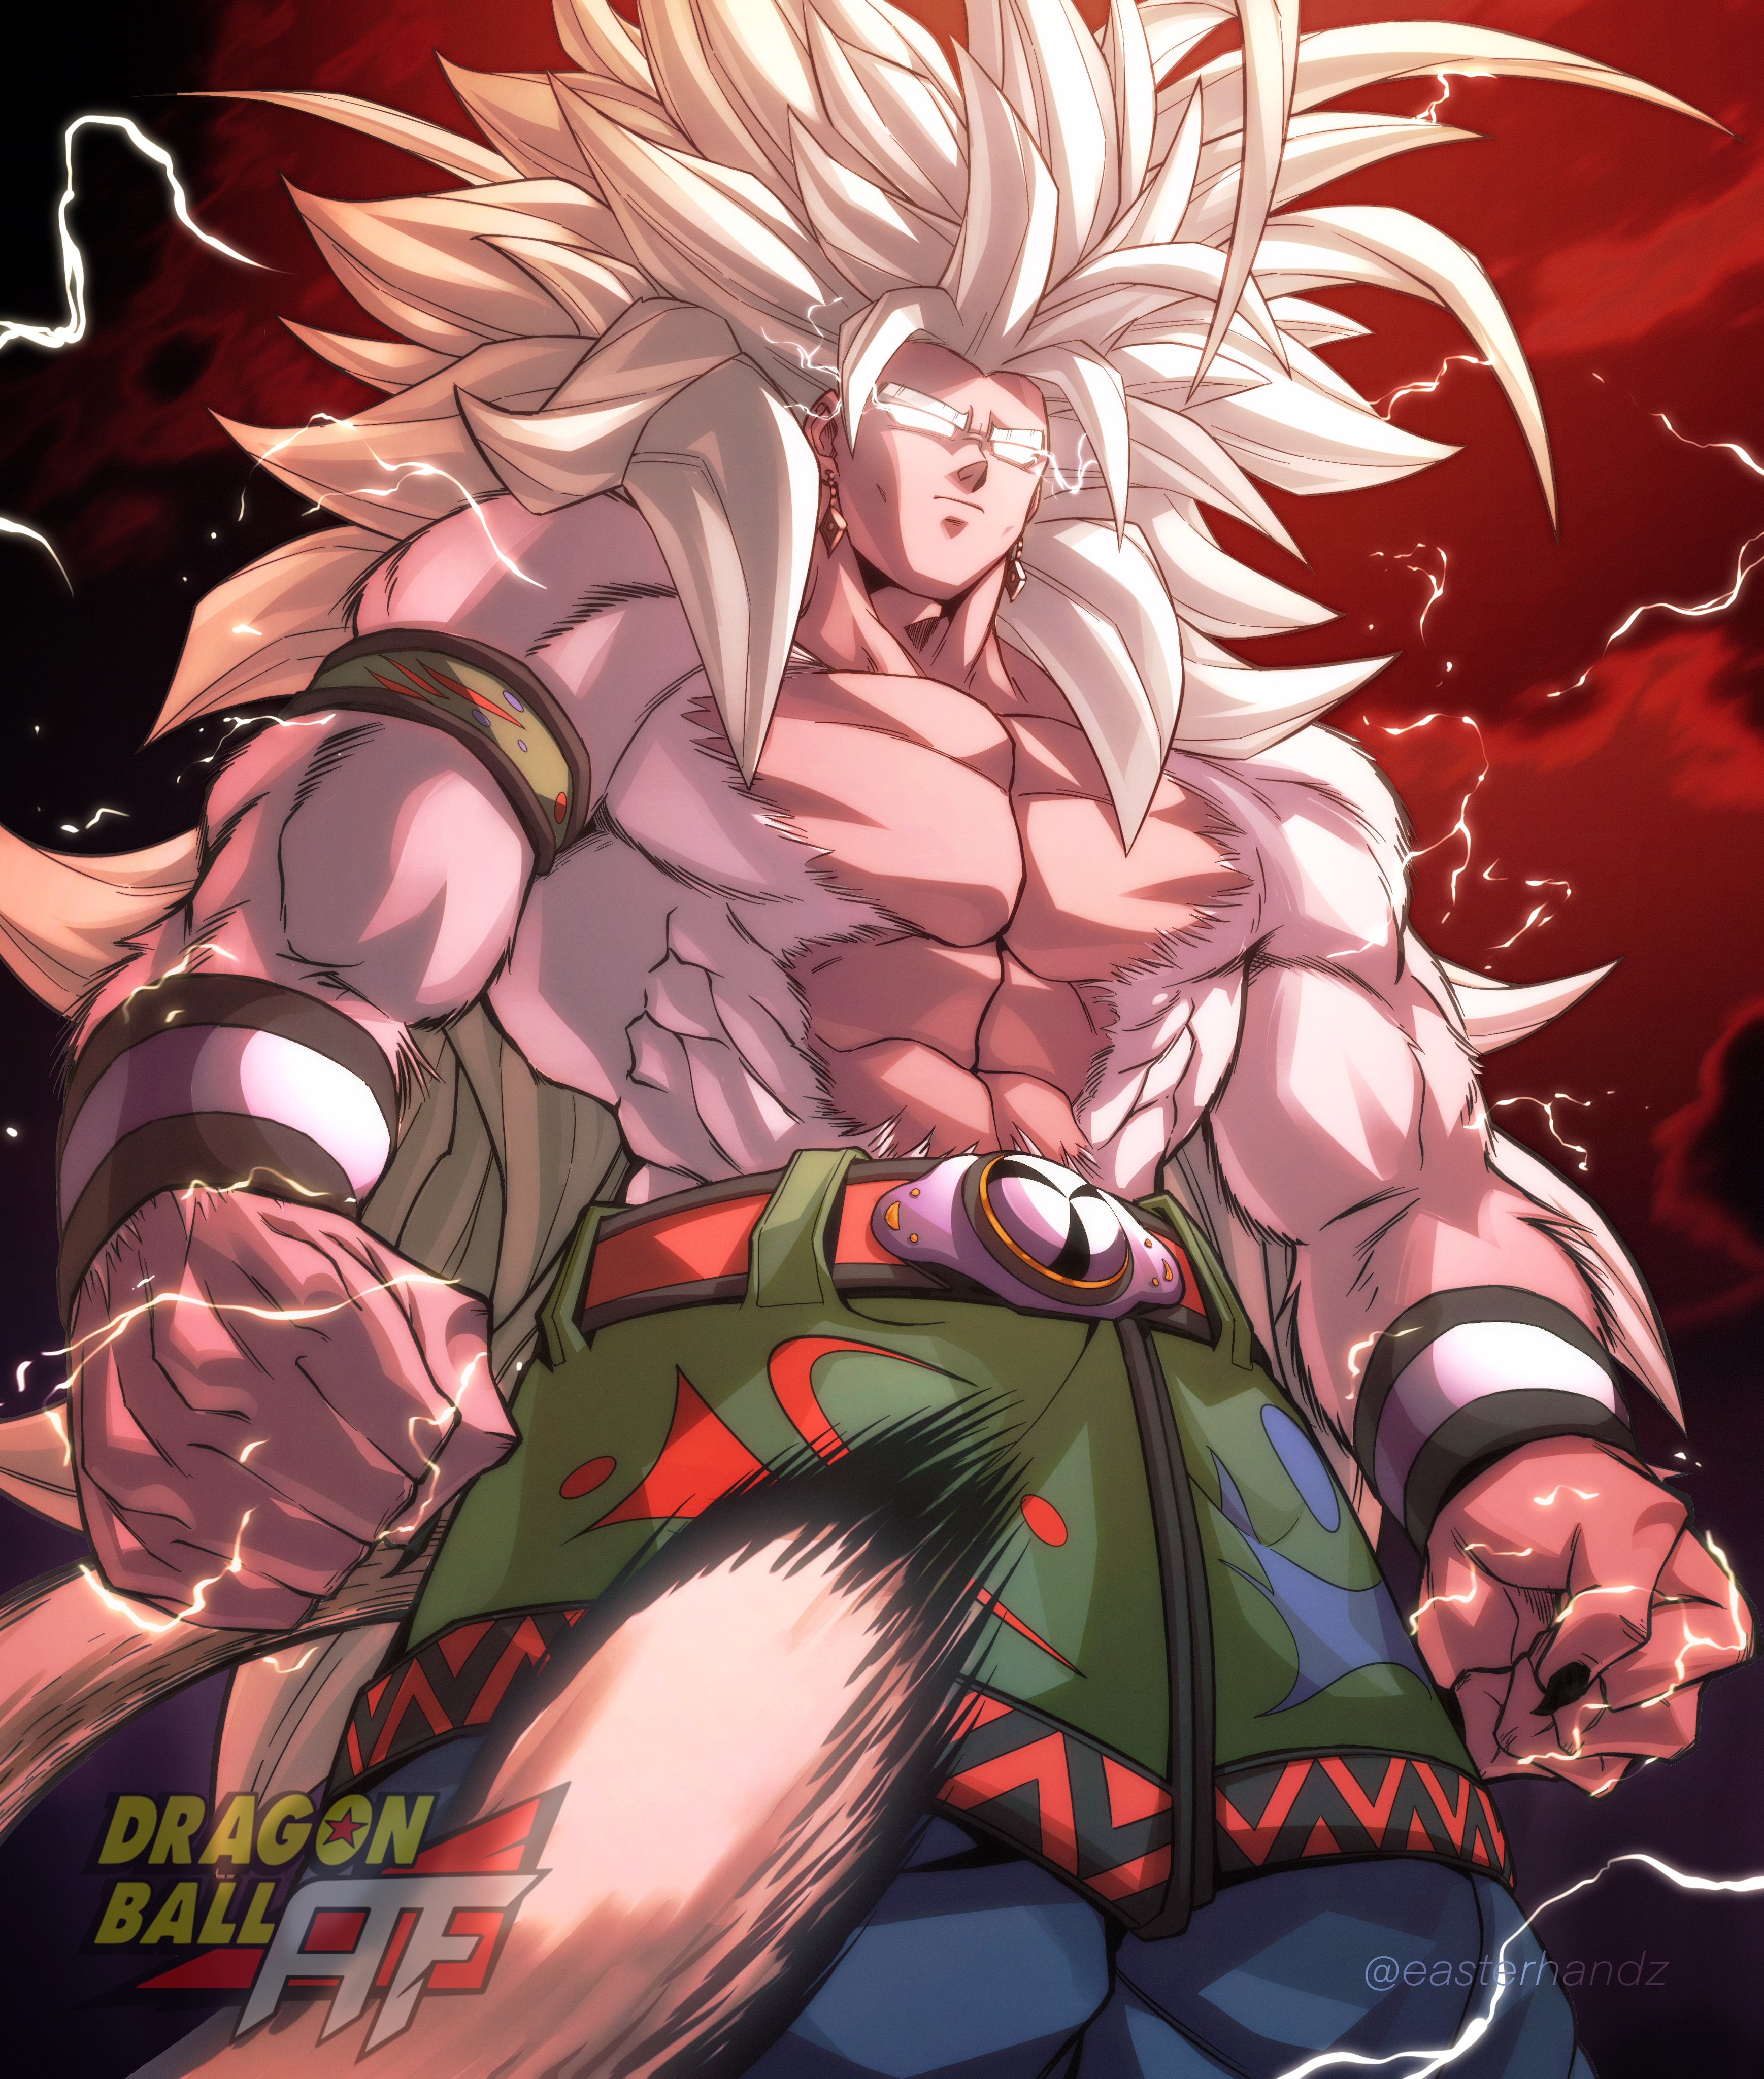 You guys wanted more Super Saiyan 5, so here's SS5 Goku (by me) : r/dbz